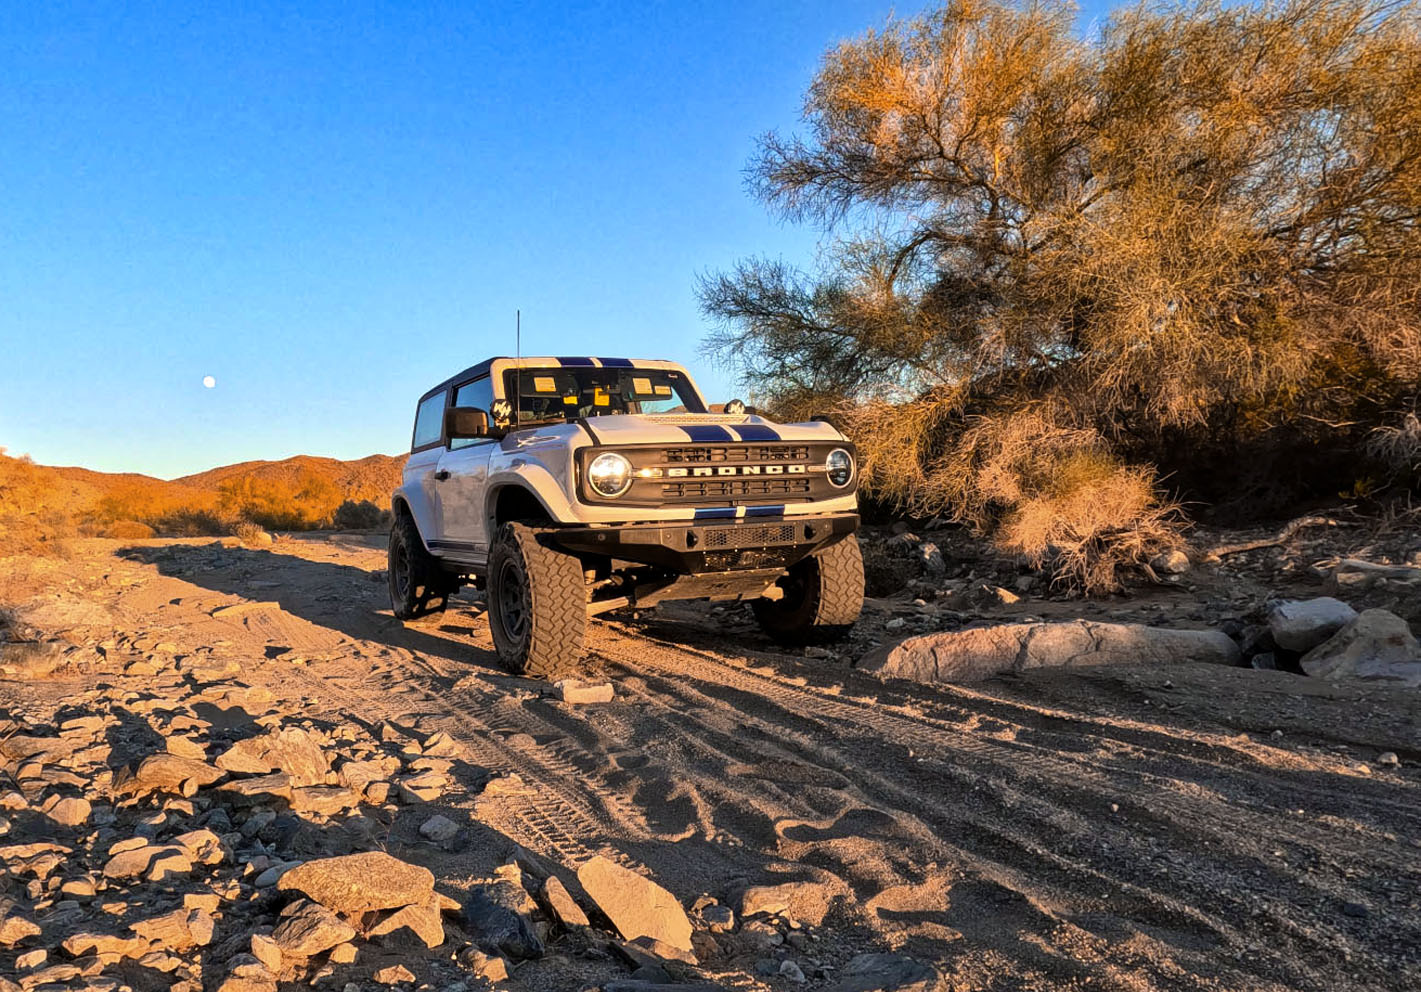 Ford Bronco Pics and Video from Pinkham Canyon in Joshua Tree National Park goproscreen1